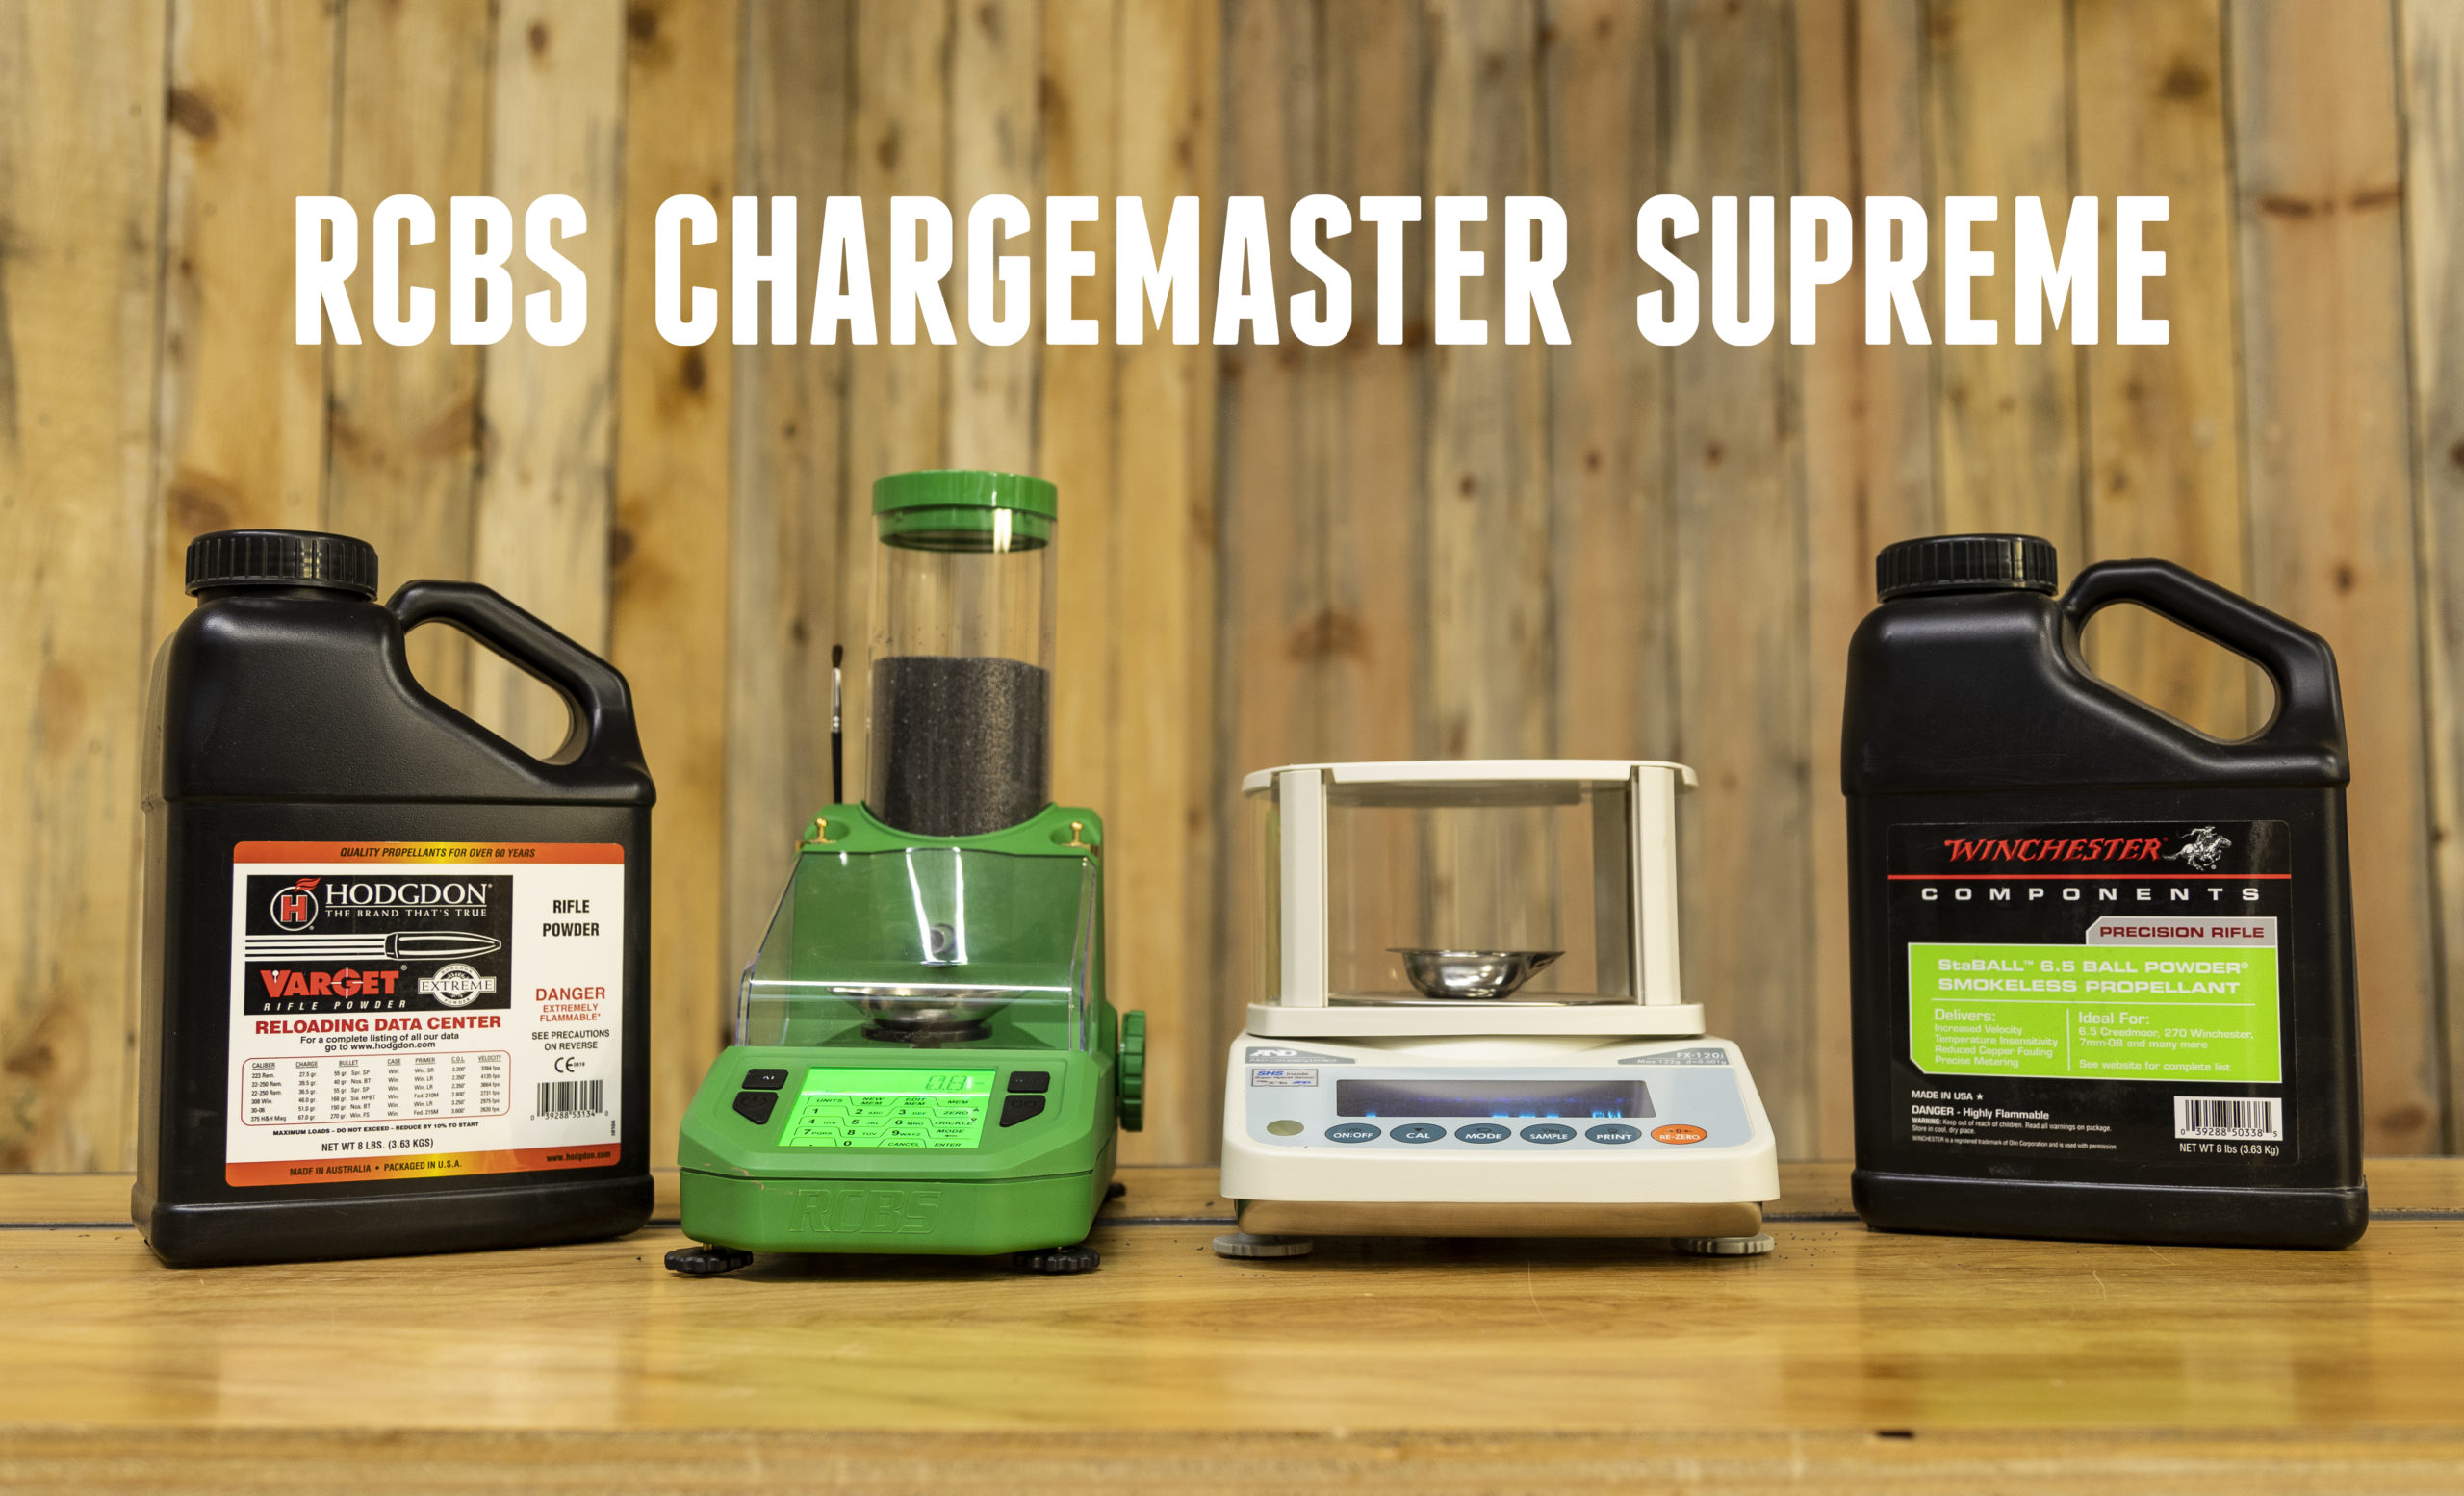 Buy ChargeMaster Supreme Electronic Powder Dispenser and More